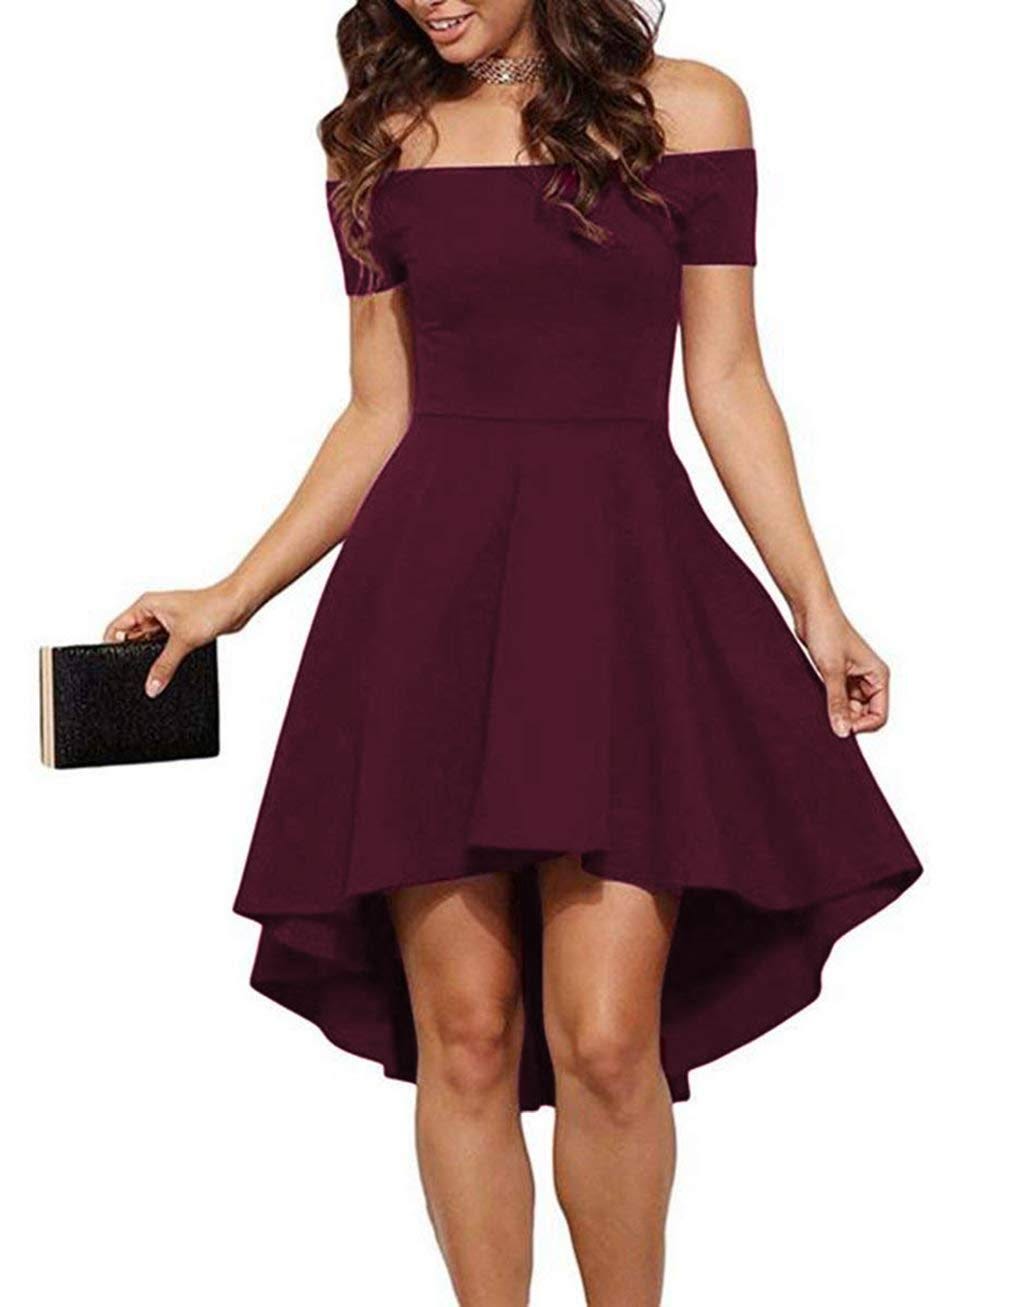 Fashionable Off the Shoulder Midi Dress for Parties and Events | Image